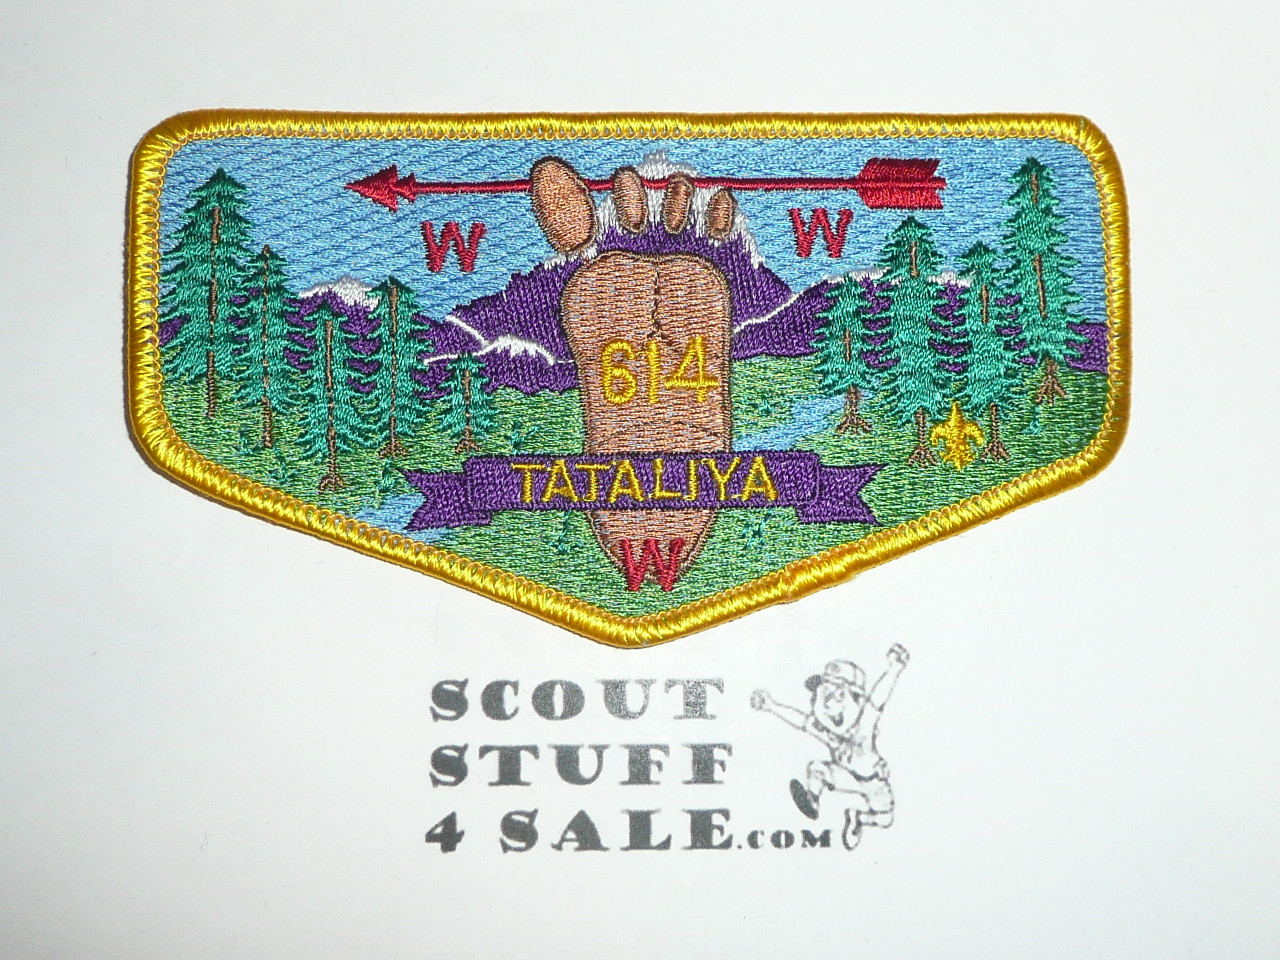 Order of the Arrow Lodge #614 Tataliya s2 Flap Patch